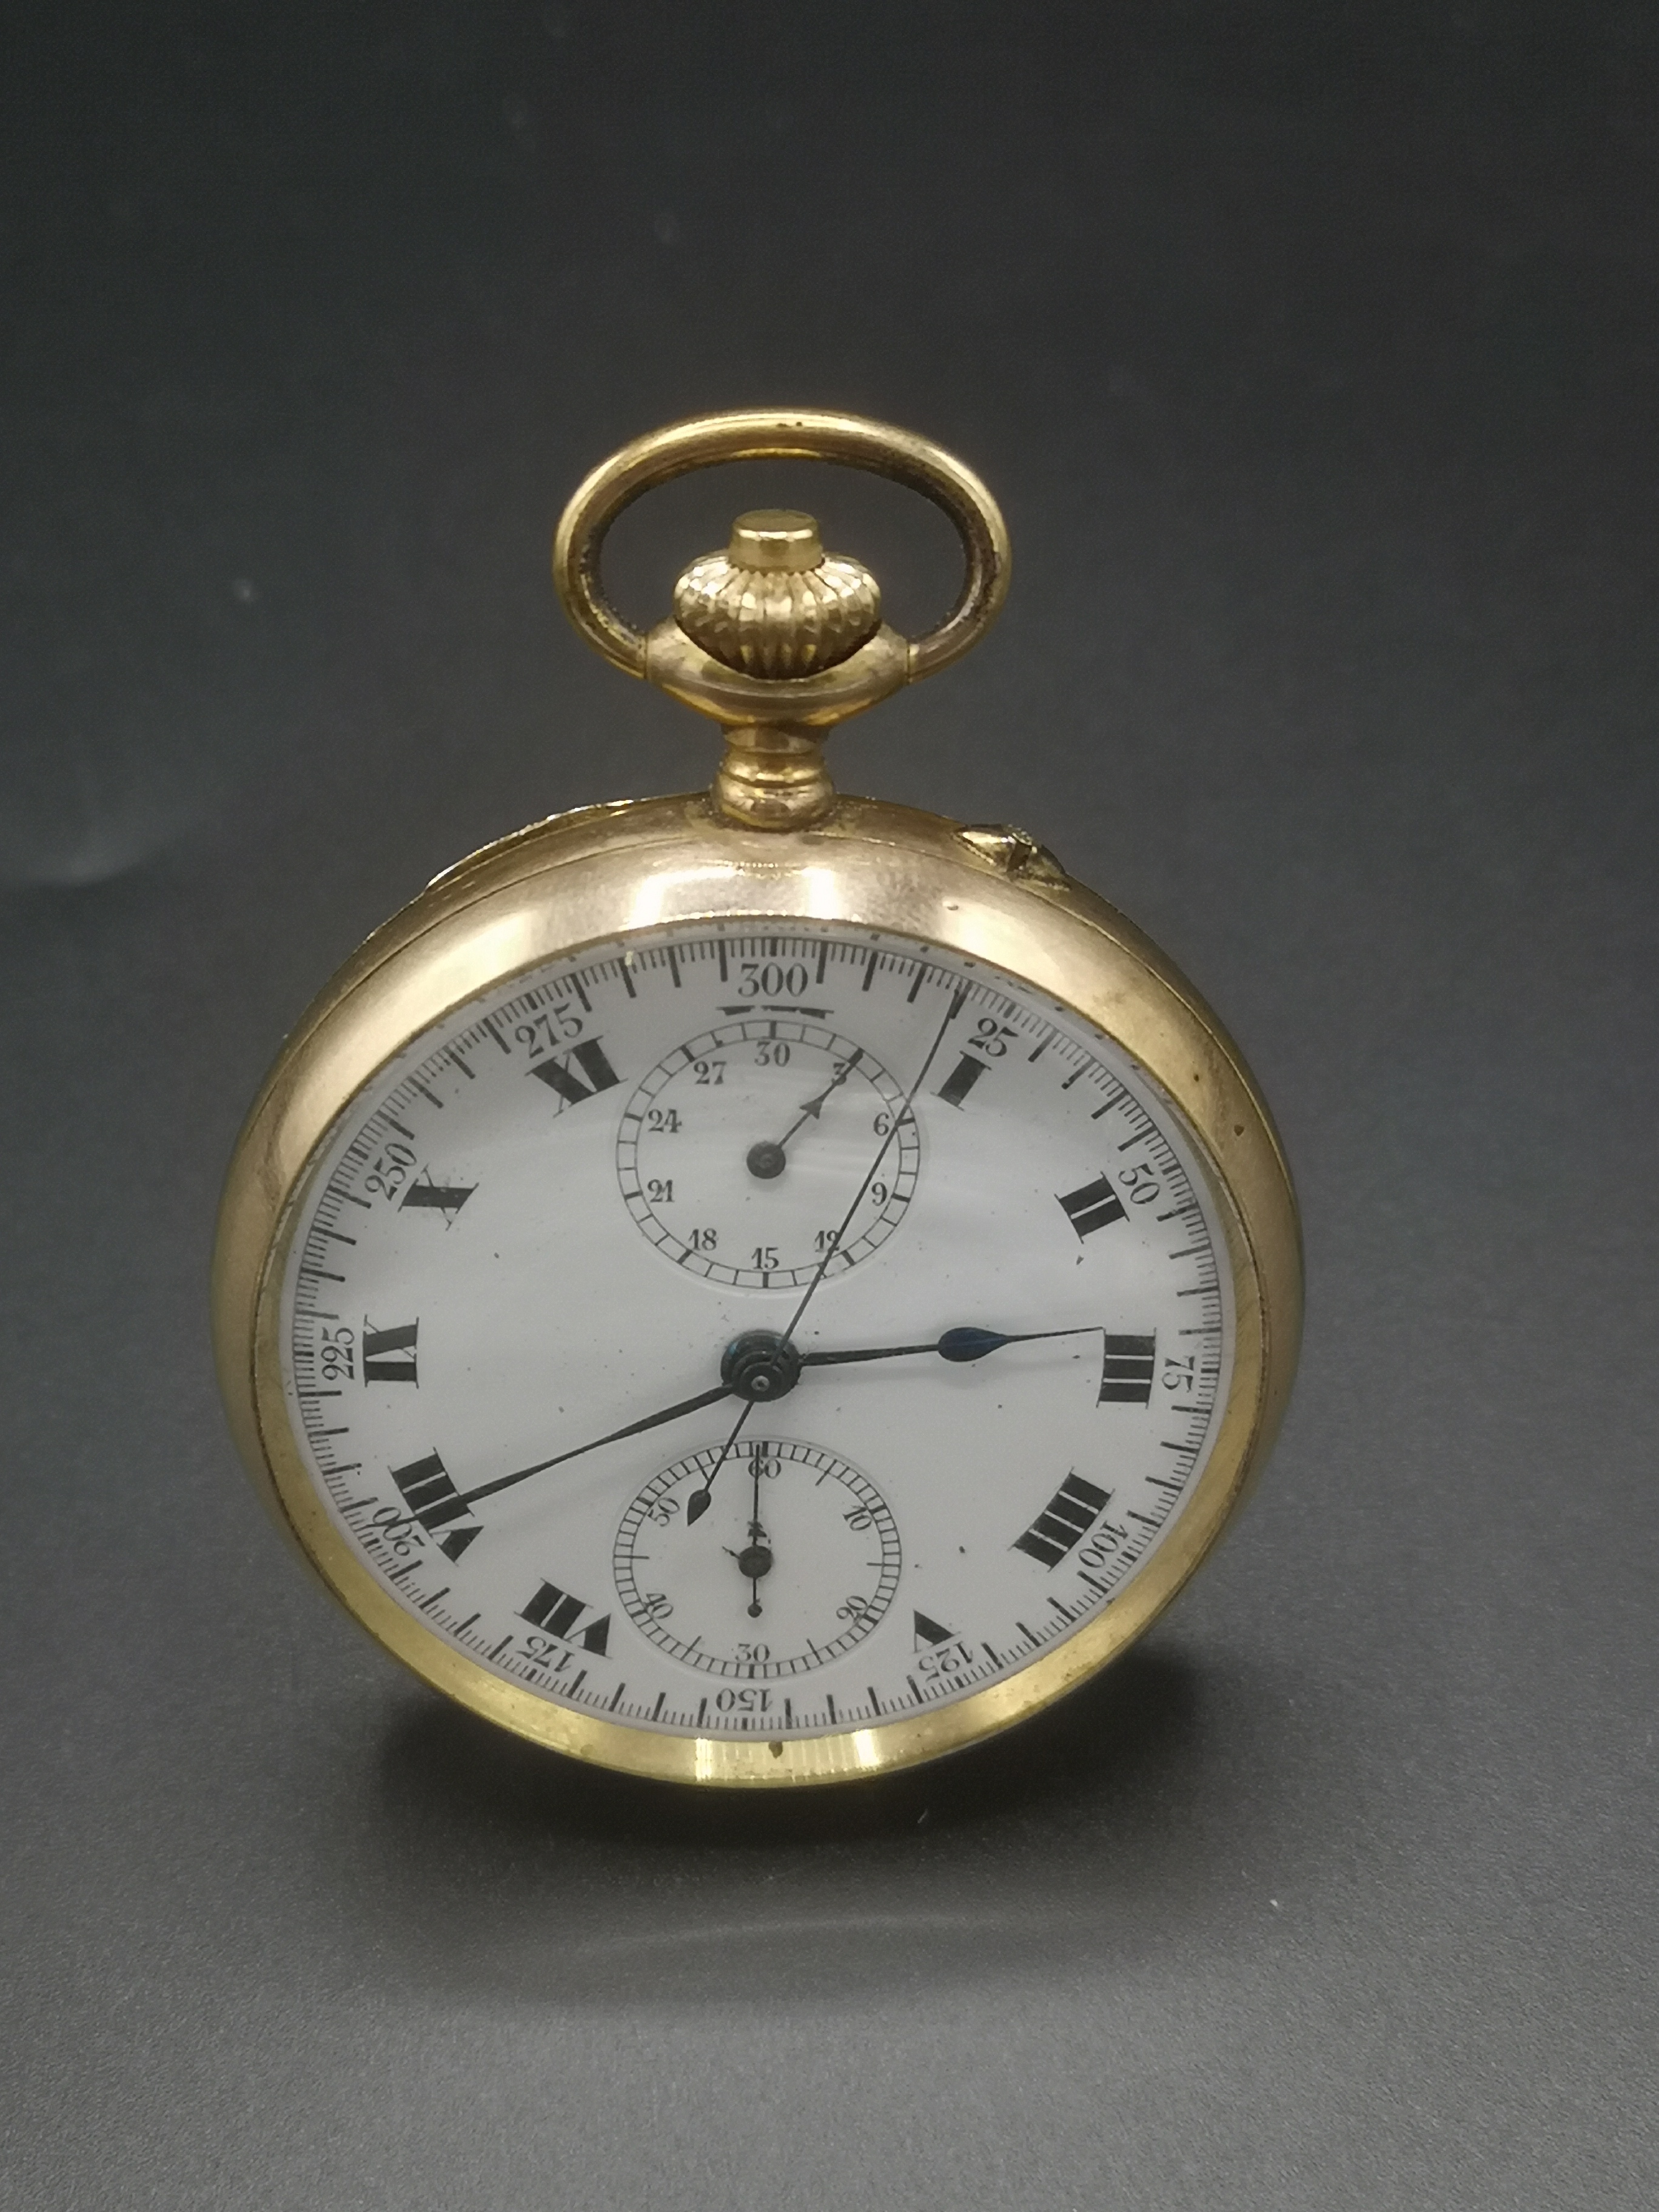 Rolled gold pocket watch - Image 6 of 6